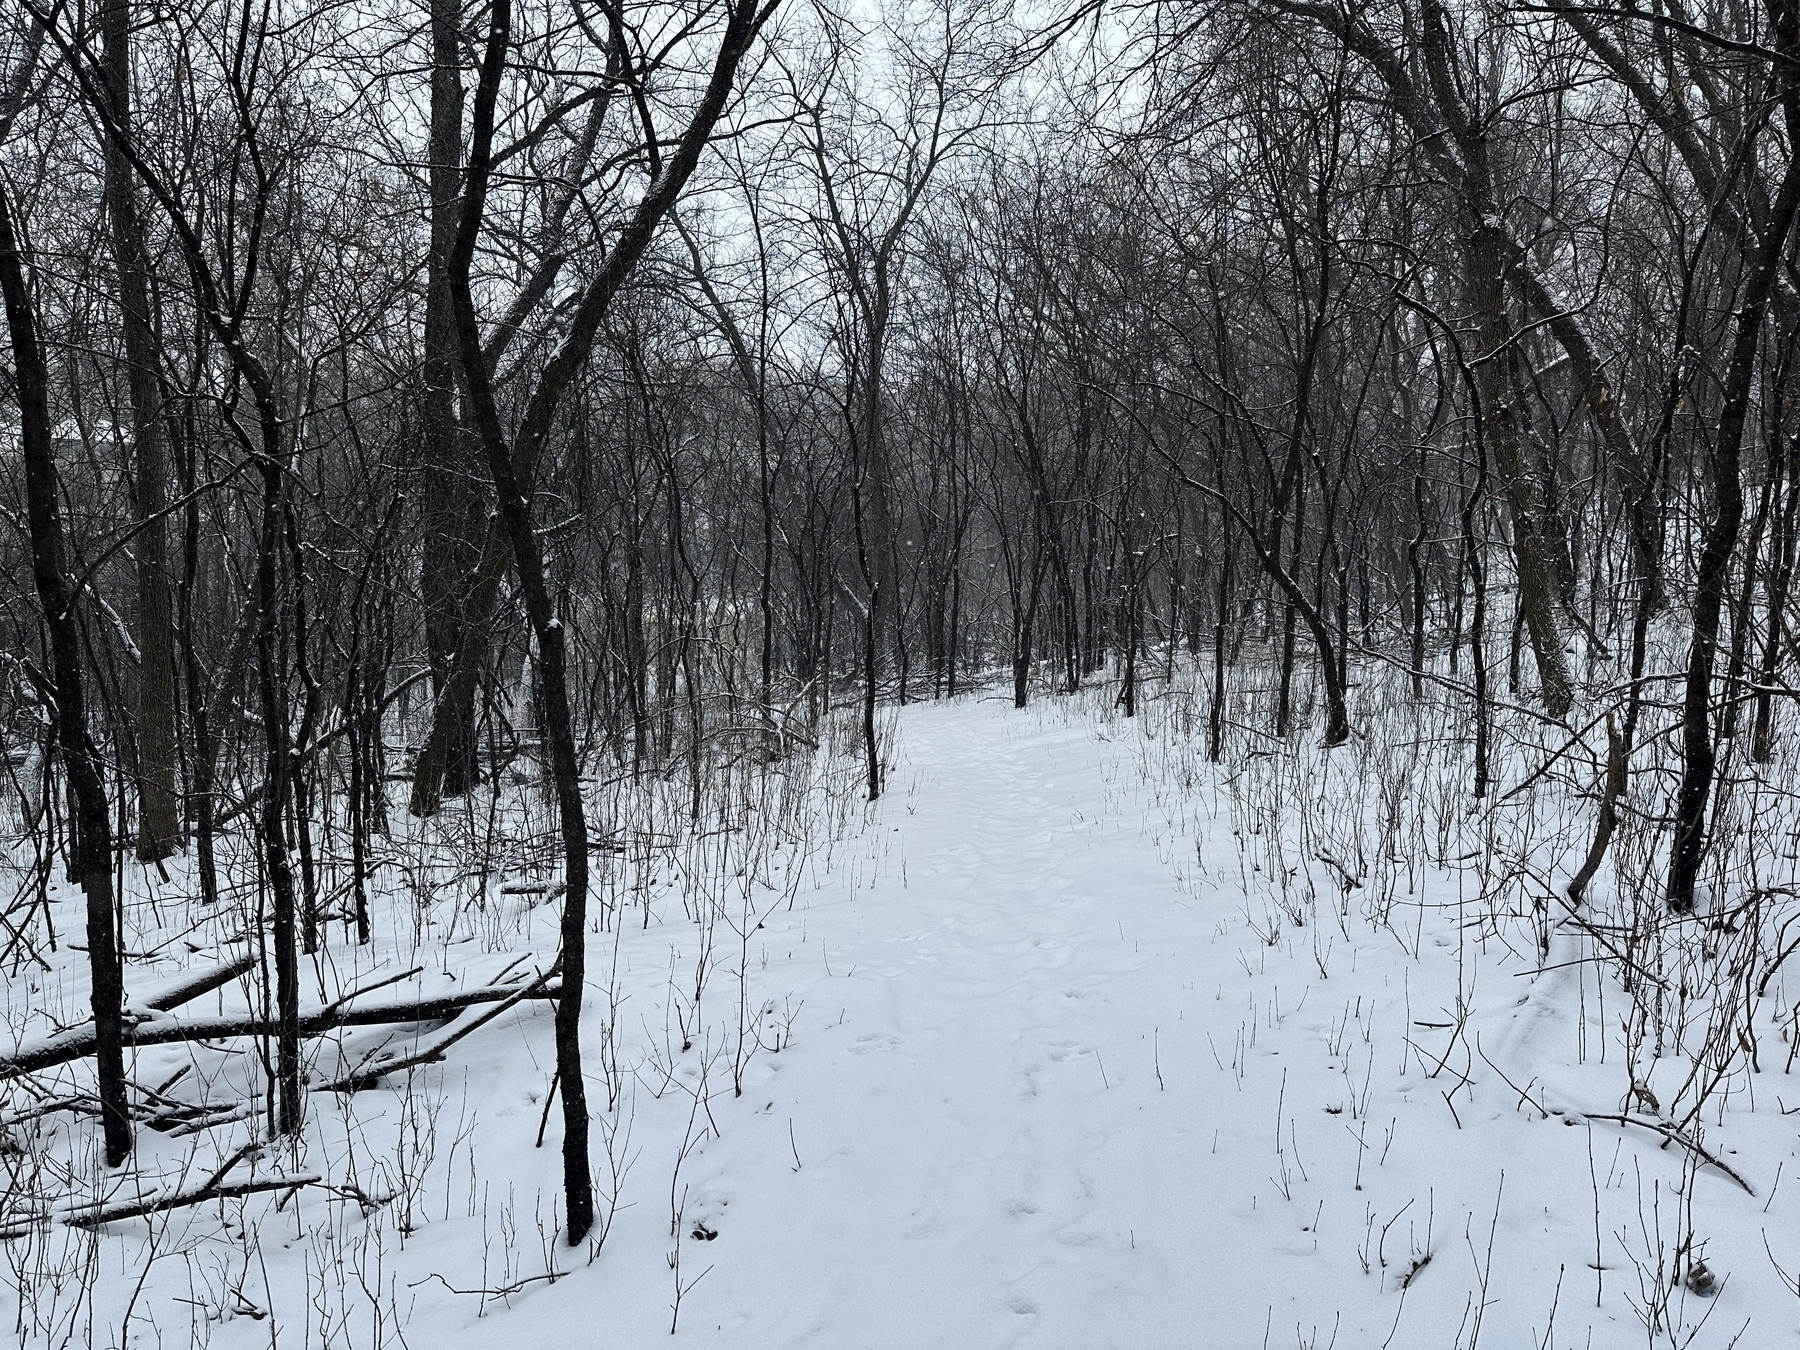 A snow-covered path winds through a bare deciduous forest, conveying a quiet, wintery atmosphere.